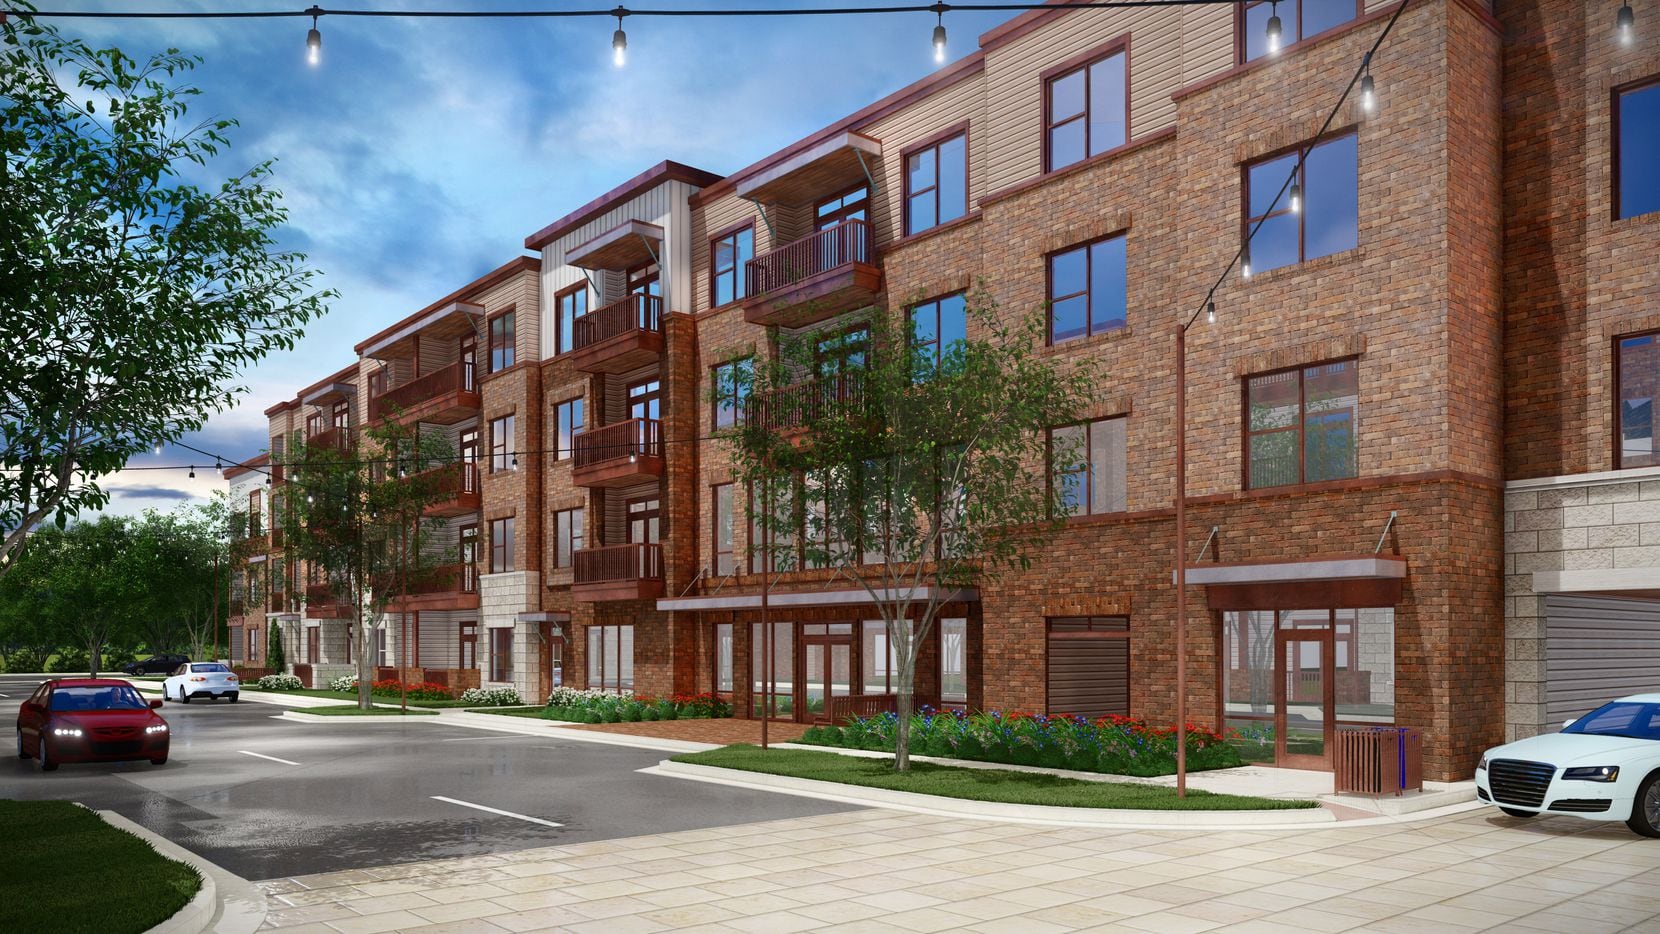 The Lenox Maplewood apartments are next to a DART rail station.